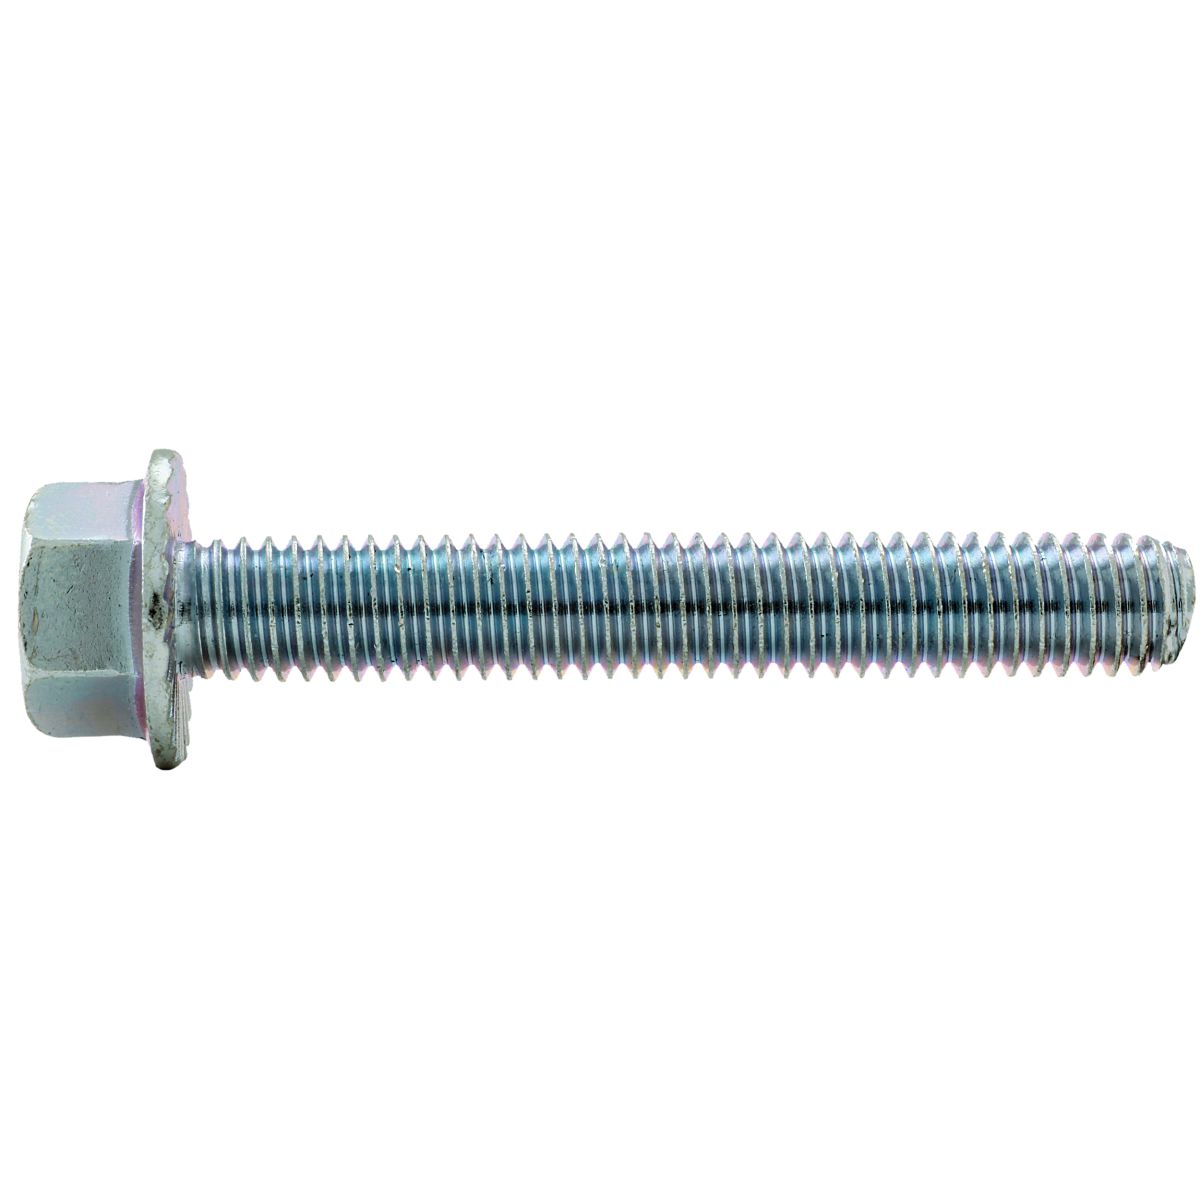 Tacoma Screw Products 3/8